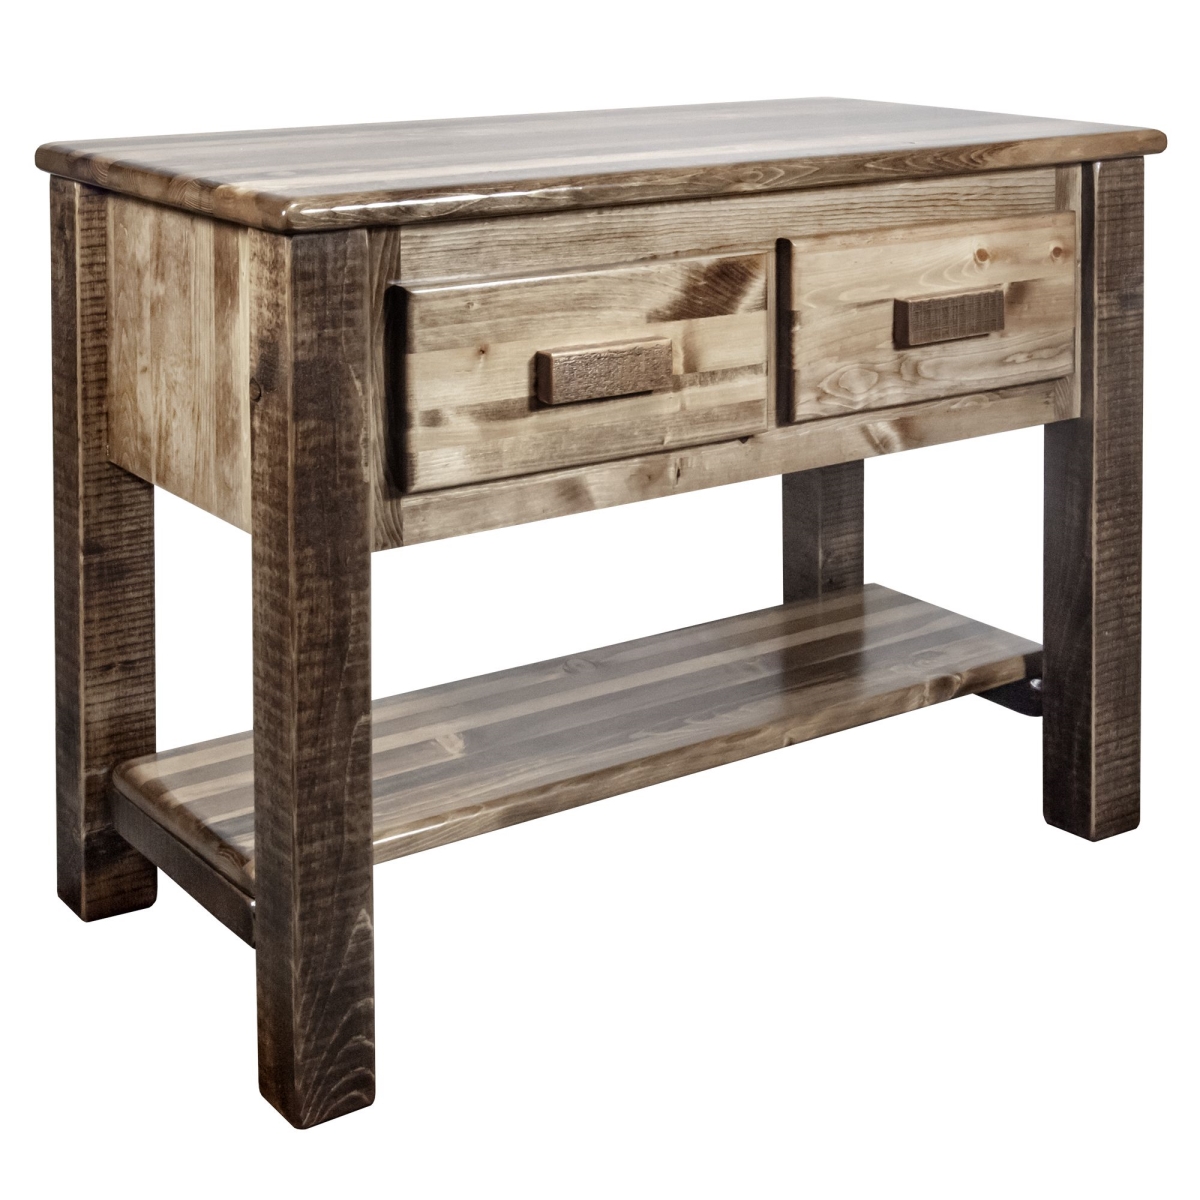 Mwhccontblw2drsl Homestead Collection Console Table With 2 Drawers, Stain & Clear Lacquer - 5.5 X 11.75 X 10.5 In.